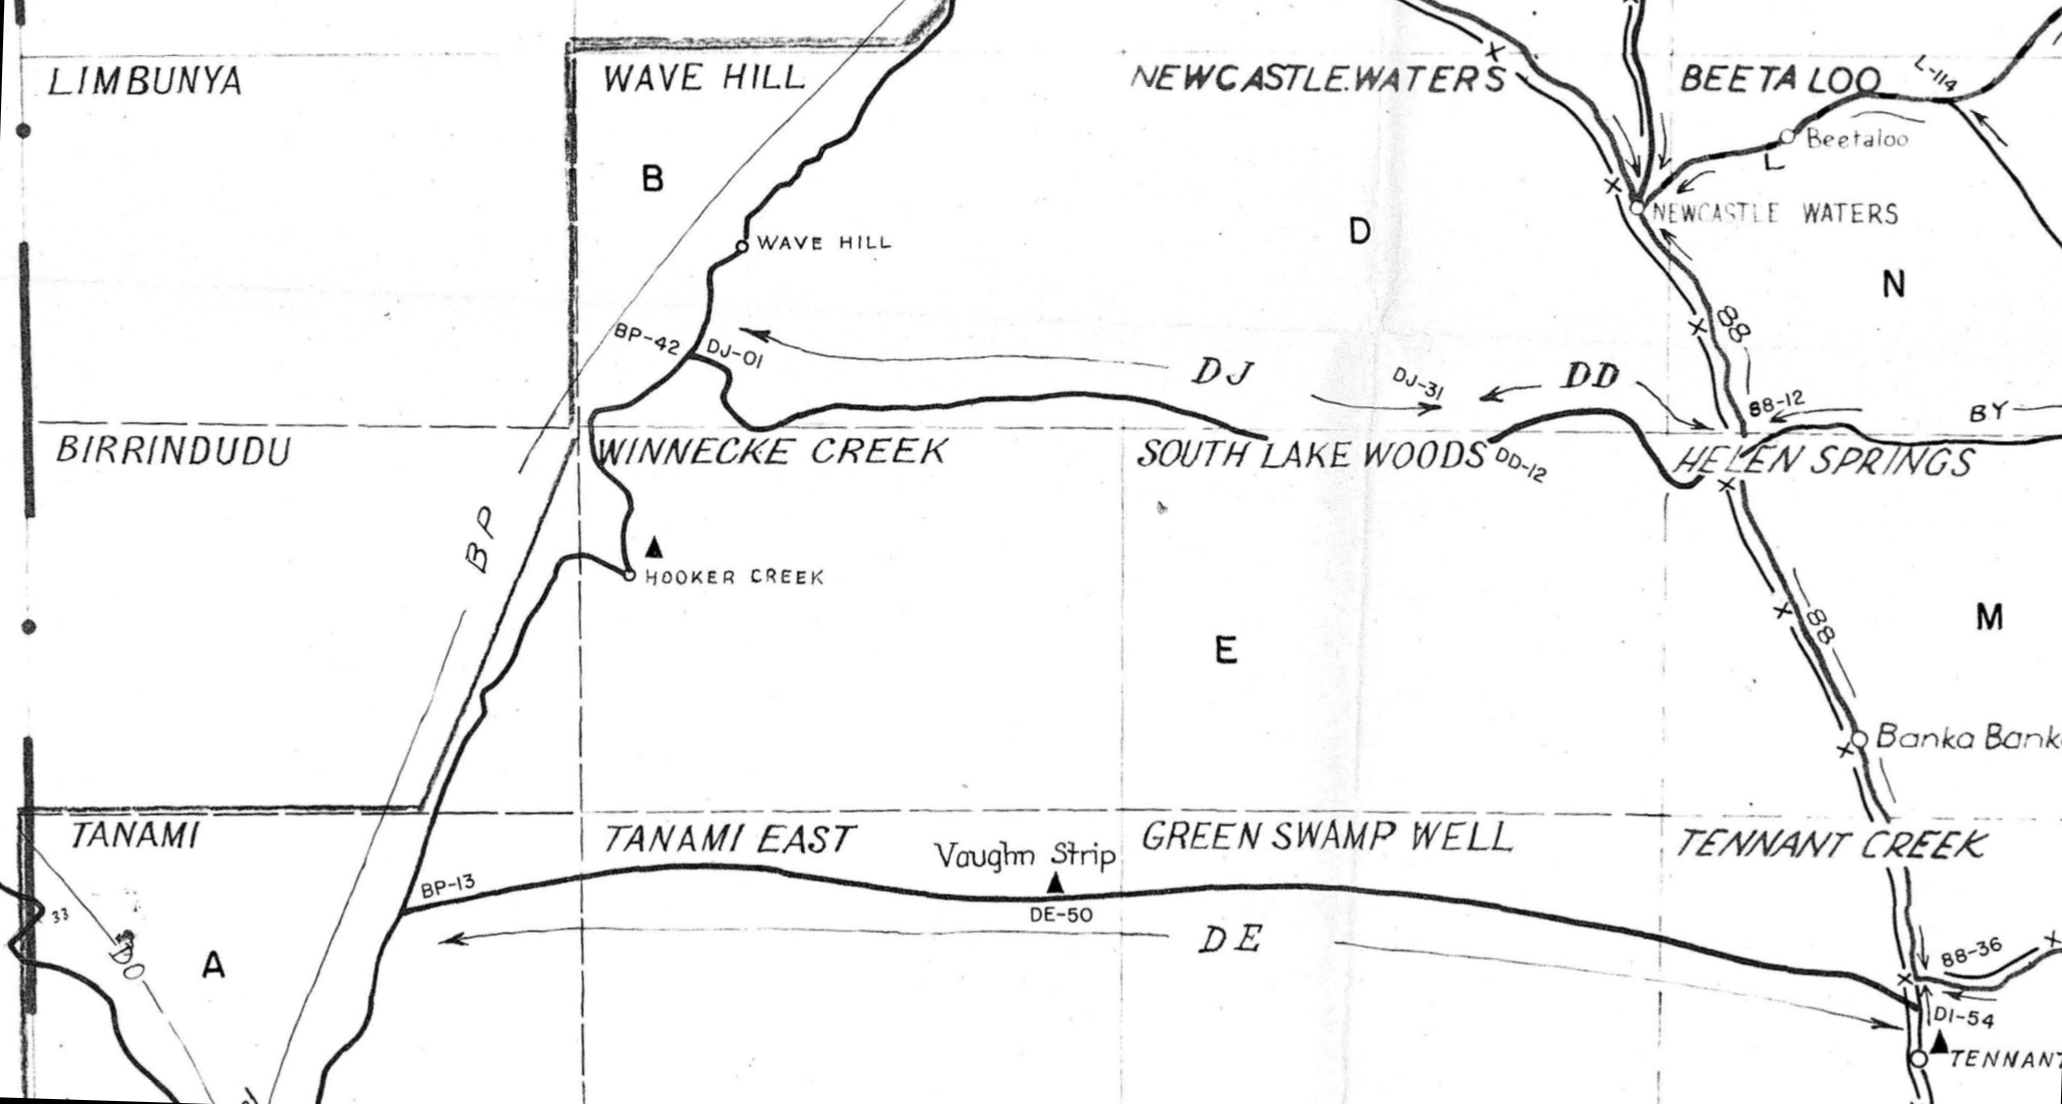 excerpt from 1965 gravity survey map